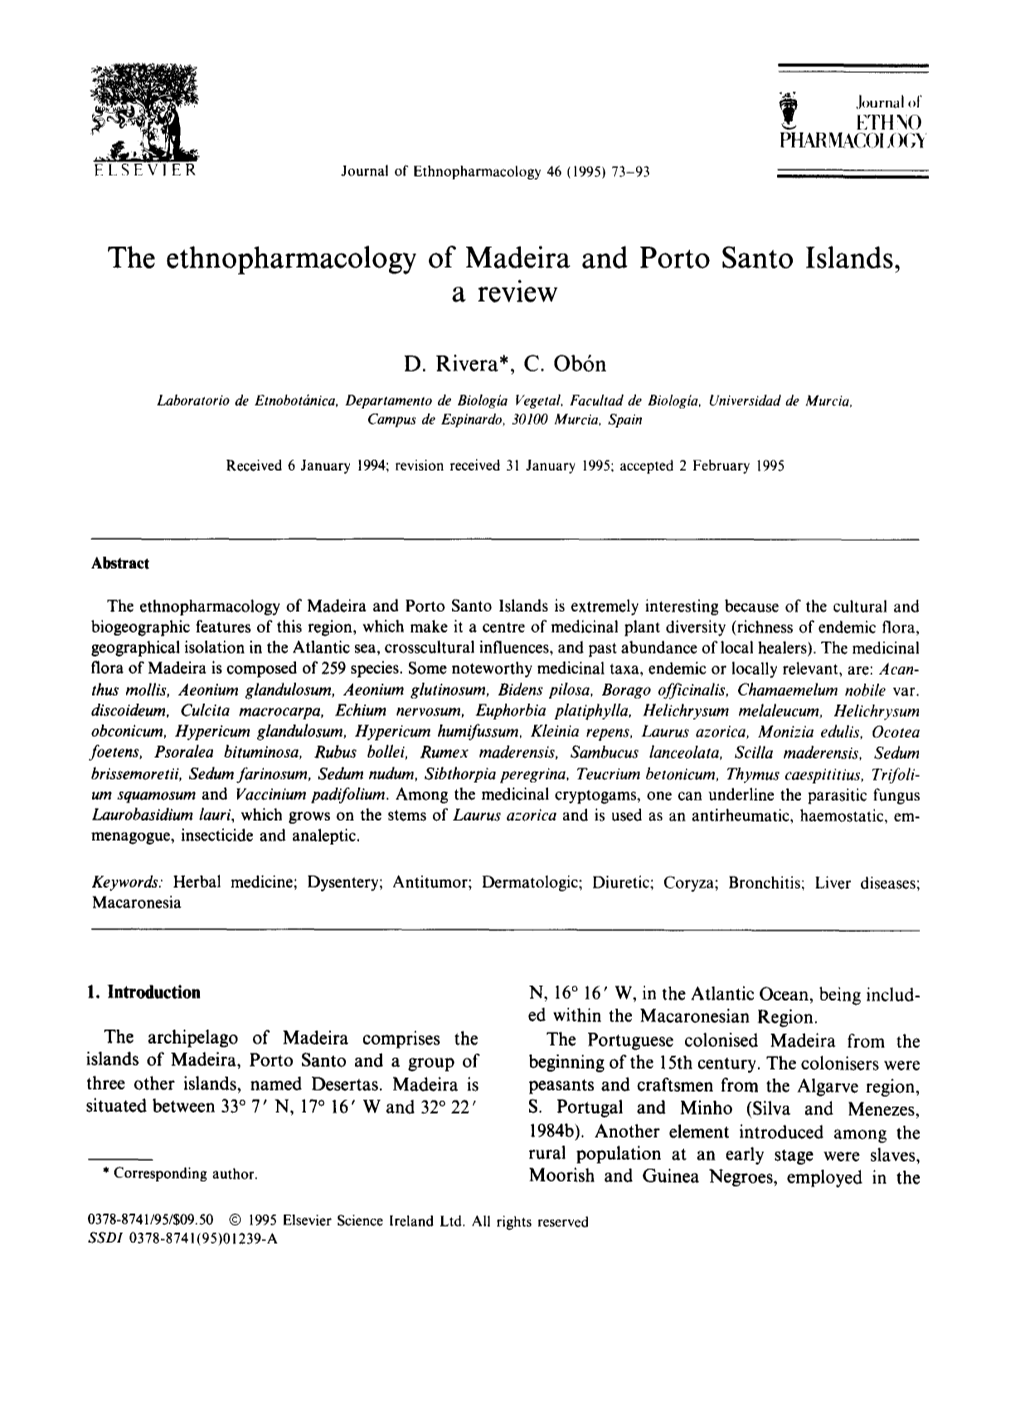 The Ethnopharmacology of Madeira and Porto Santo Islands, a Review